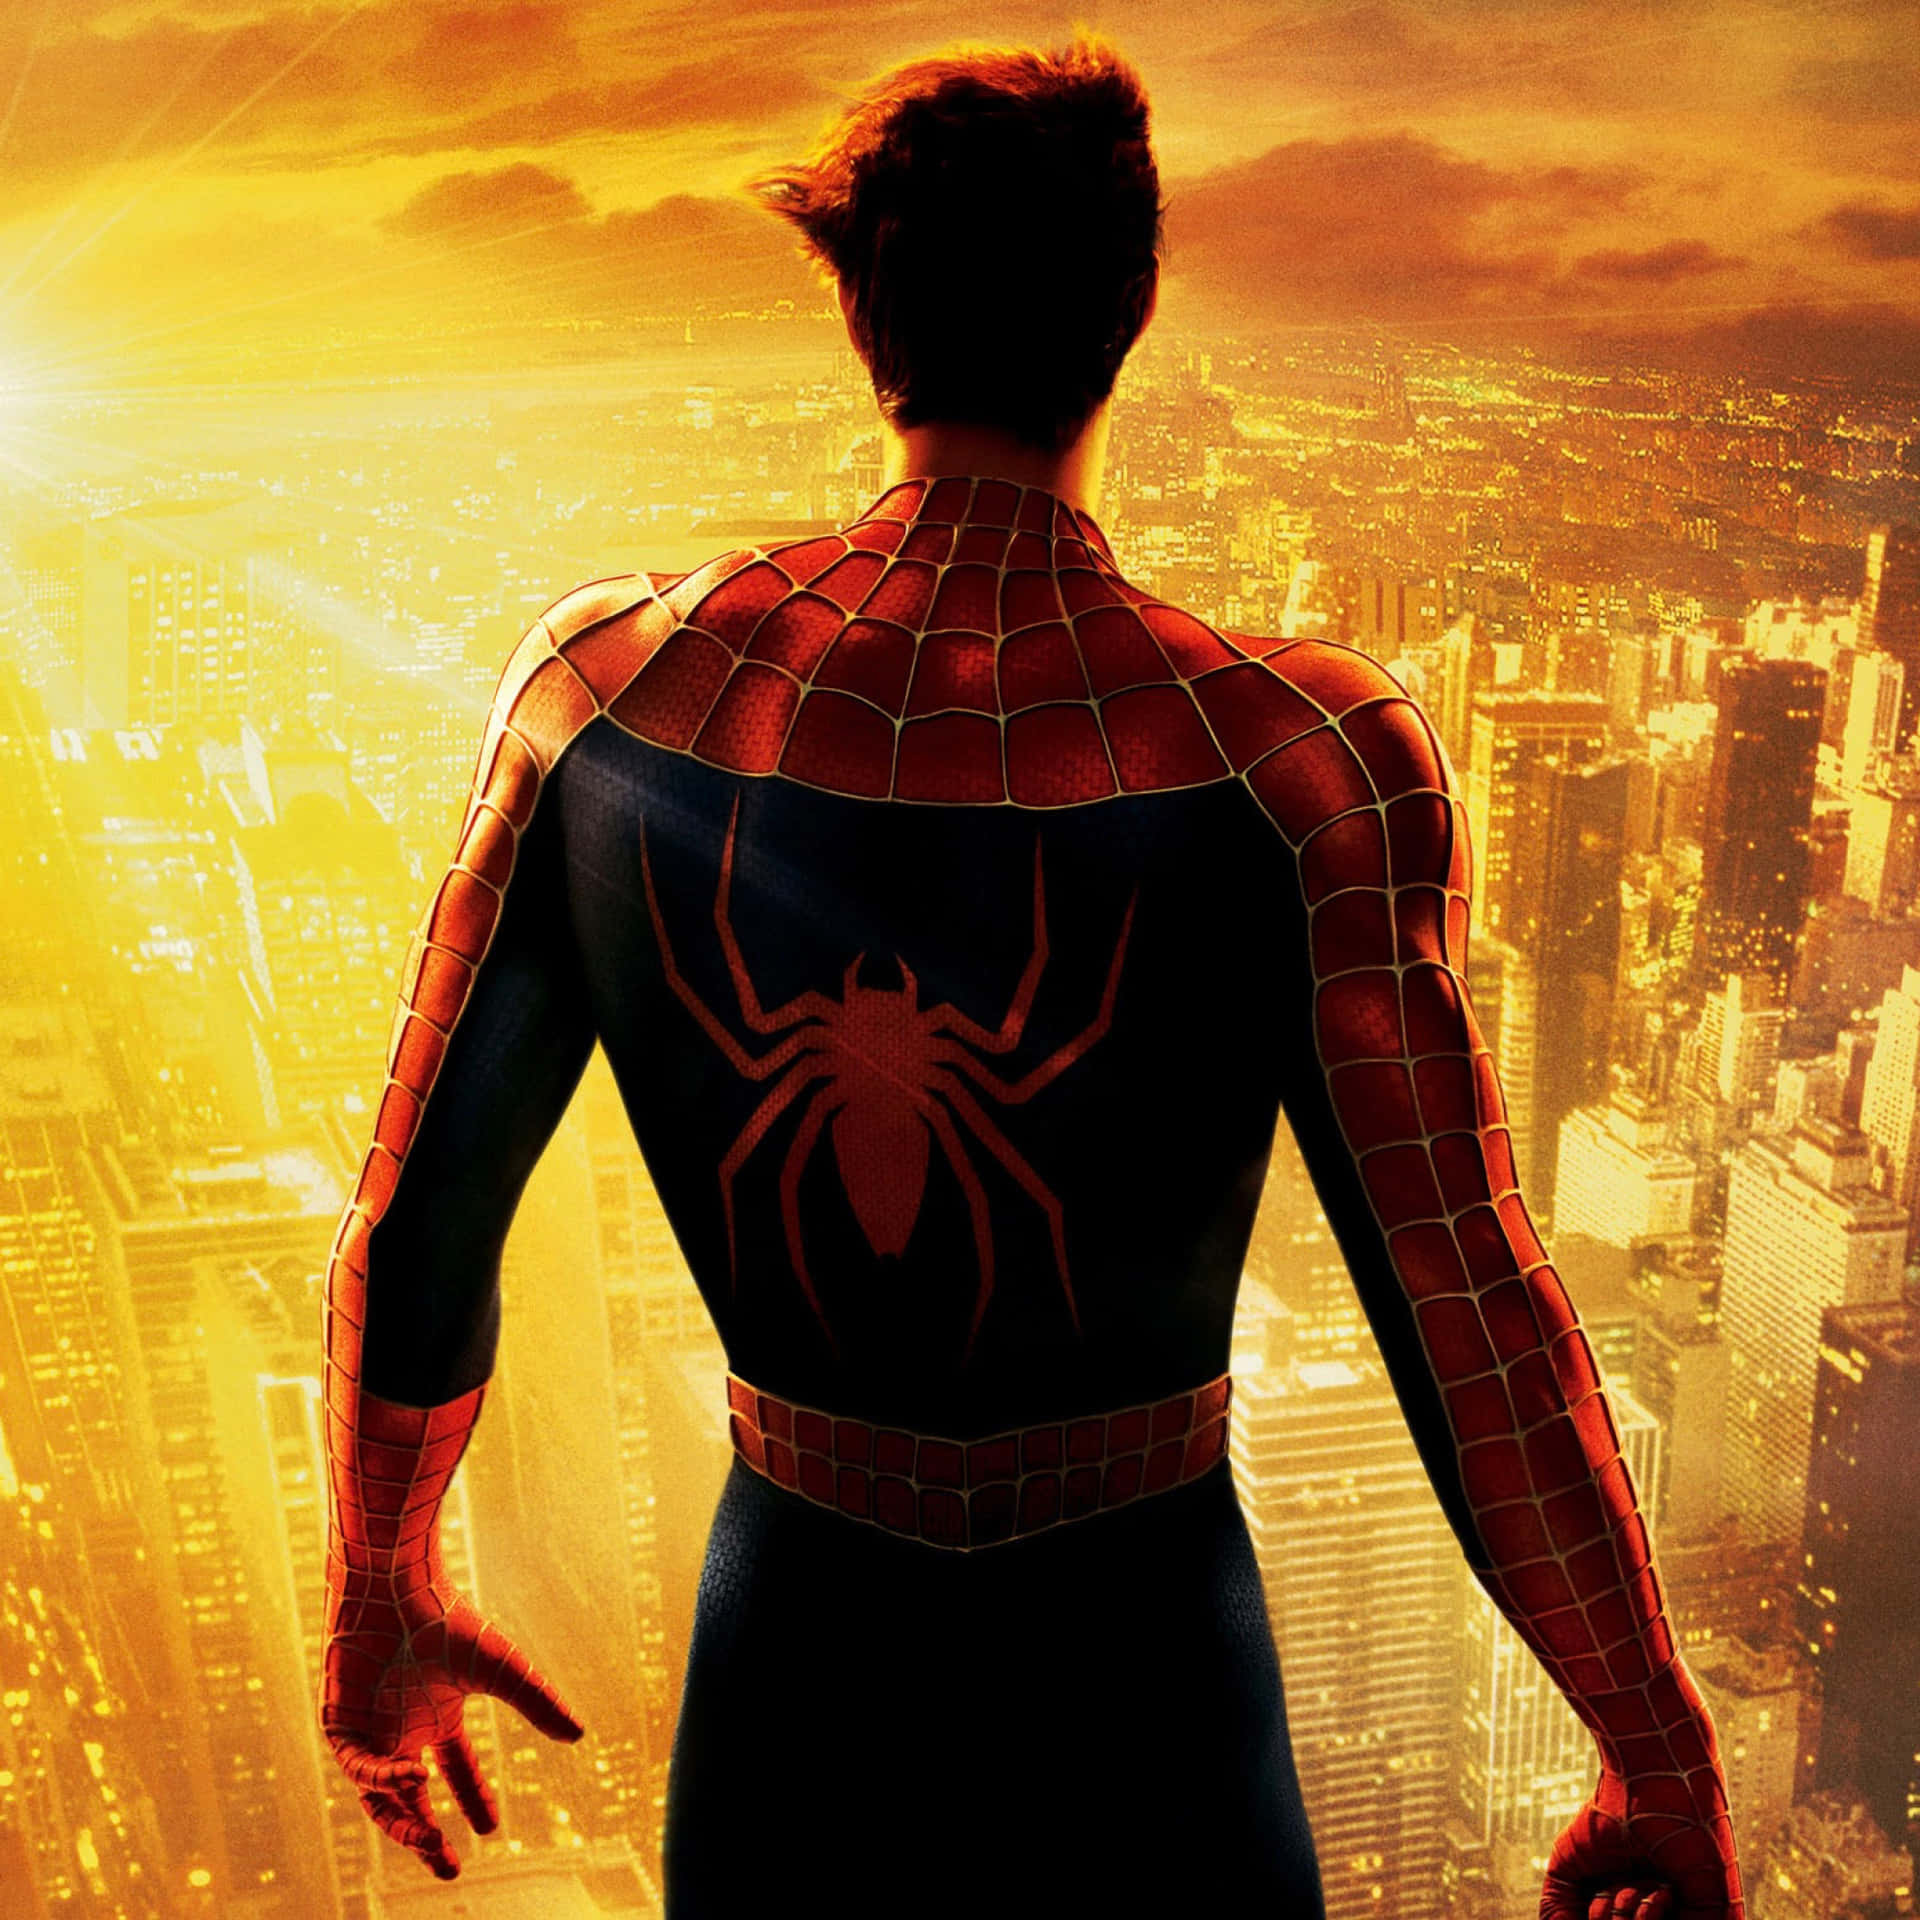 Follow the journey of Peter Parker and experience the action packed, intriguing Spider Man Trilogy. Wallpaper